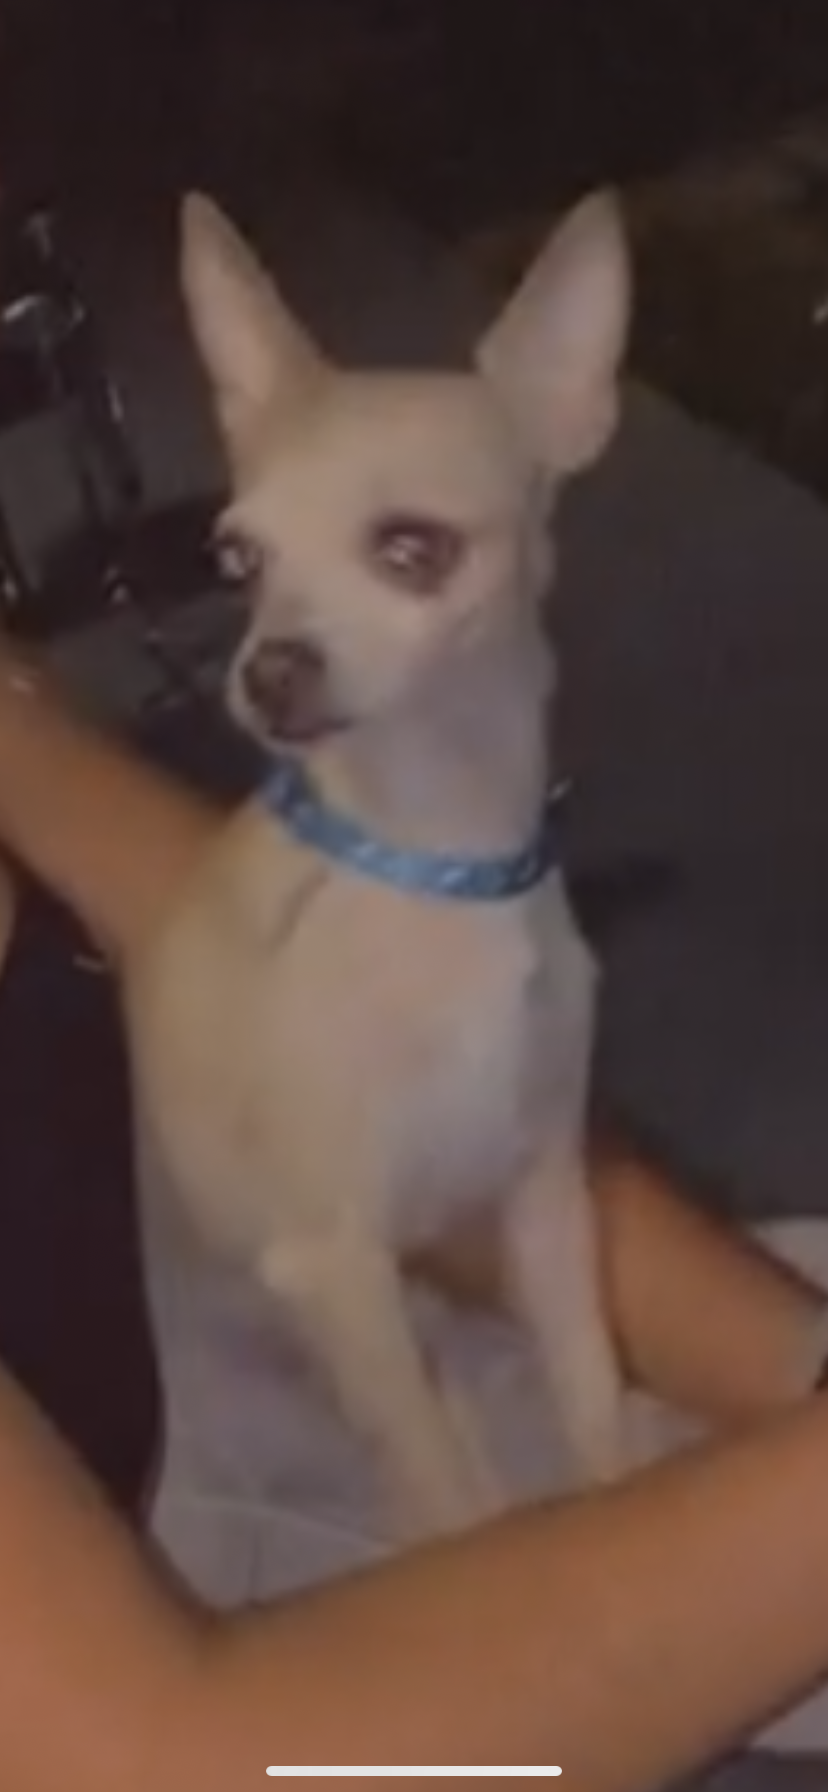 Image of Twinkie, Lost Dog